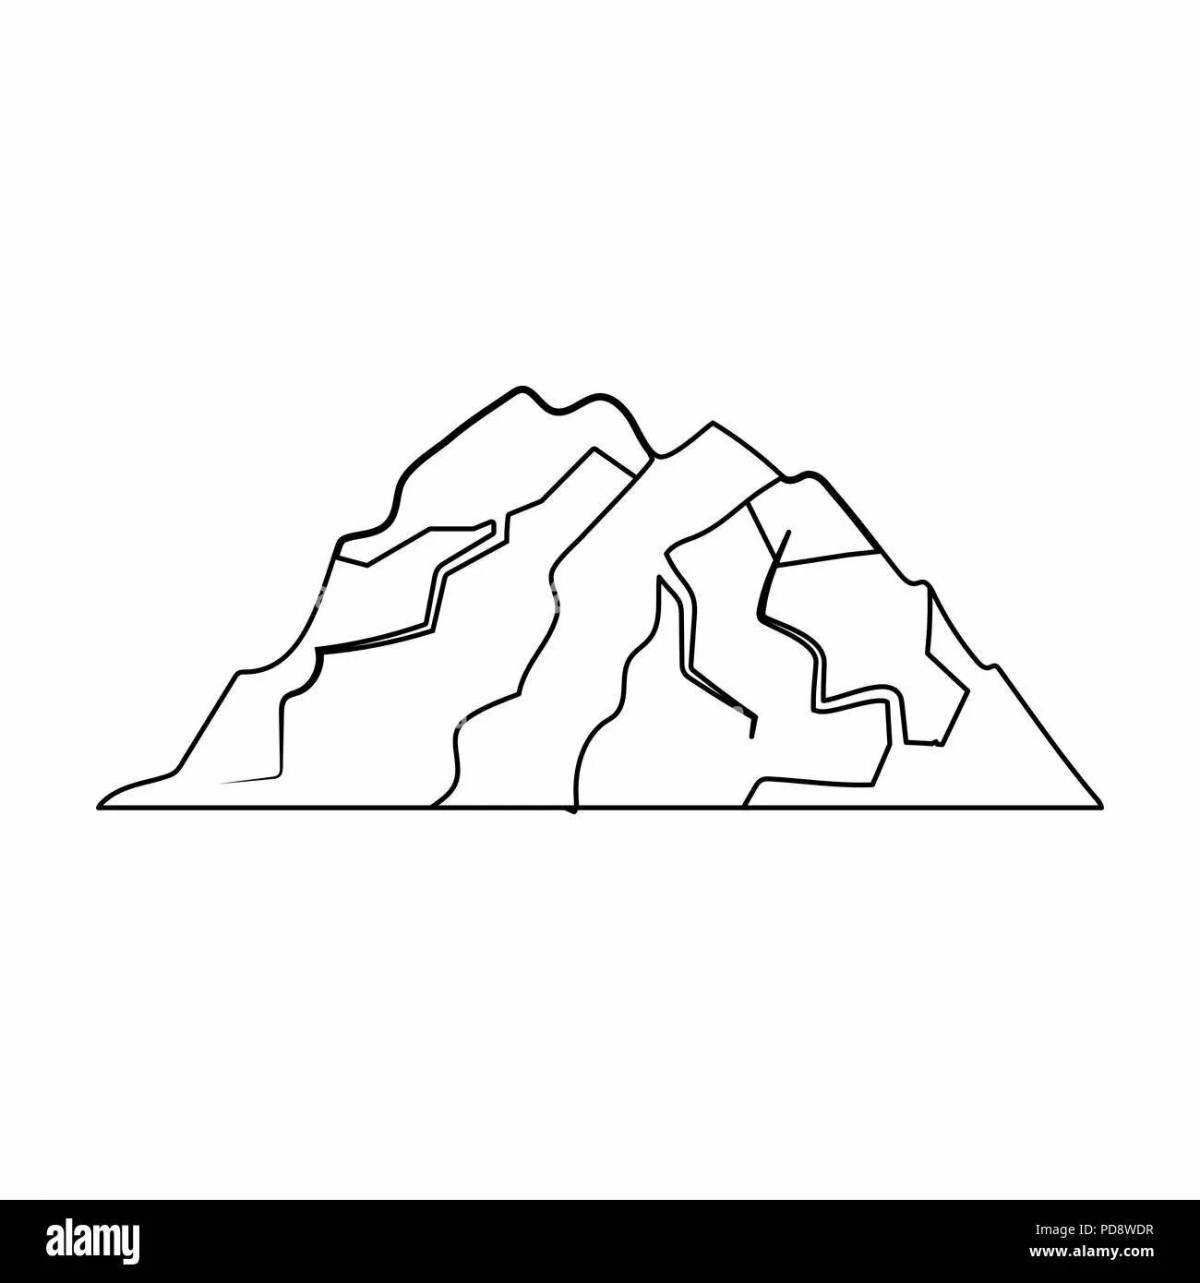 Playful iceberg coloring book for kids